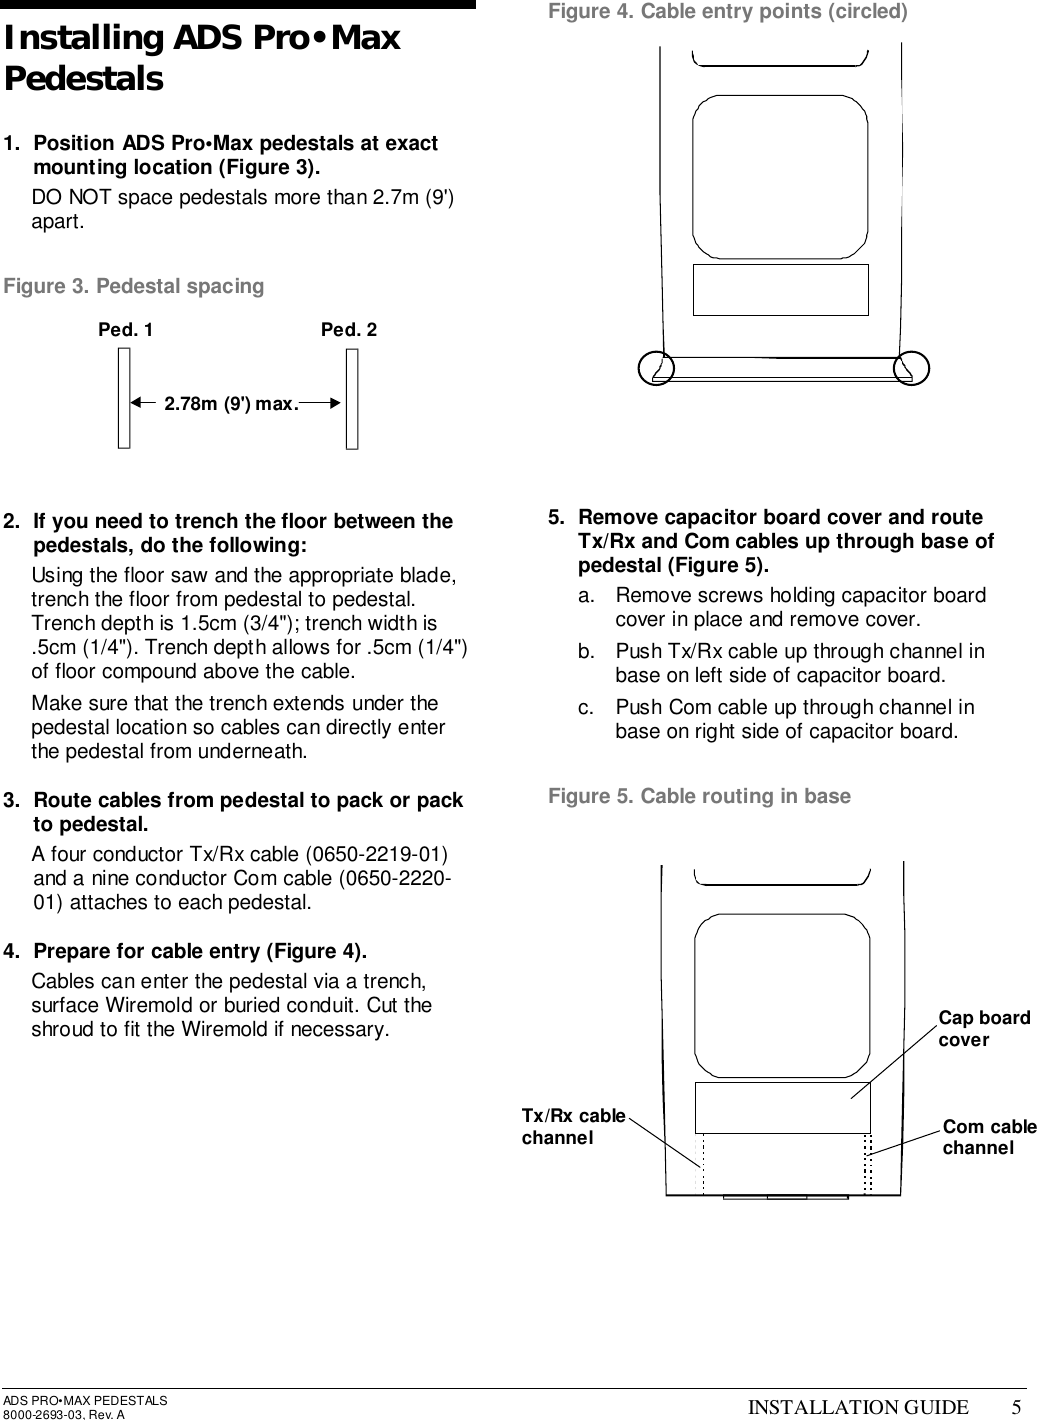 ADS PRO•MAX PEDESTALS8000-2693-03, Rev. A INSTALLATION GUIDE 5Installing ADS Pro•MaxPedestals1.  Position ADS Pro•Max pedestals at exactmounting location (Figure 3).  DO NOT space pedestals more than 2.7m (9&apos;)apart.Figure 3. Pedestal spacing2.  If you need to trench the floor between thepedestals, do the following:  Using the floor saw and the appropriate blade,trench the floor from pedestal to pedestal.Trench depth is 1.5cm (3/4&quot;); trench width is.5cm (1/4&quot;). Trench depth allows for .5cm (1/4&quot;)of floor compound above the cable.  Make sure that the trench extends under thepedestal location so cables can directly enterthe pedestal from underneath.3.  Route cables from pedestal to pack or packto pedestal.  A four conductor Tx/Rx cable (0650-2219-01)and a nine conductor Com cable (0650-2220-01) attaches to each pedestal.4.  Prepare for cable entry (Figure 4).  Cables can enter the pedestal via a trench,surface Wiremold or buried conduit. Cut theshroud to fit the Wiremold if necessary.Figure 4. Cable entry points (circled)5.  Remove capacitor board cover and routeTx/Rx and Com cables up through base ofpedestal (Figure 5).a.  Remove screws holding capacitor boardcover in place and remove cover.b.  Push Tx/Rx cable up through channel inbase on left side of capacitor board.c.  Push Com cable up through channel inbase on right side of capacitor board.Figure 5. Cable routing in base2.78m (9&apos;) max.Ped. 1 Ped. 2Cap boardcoverCom cablechannelTx/Rx cablechannel